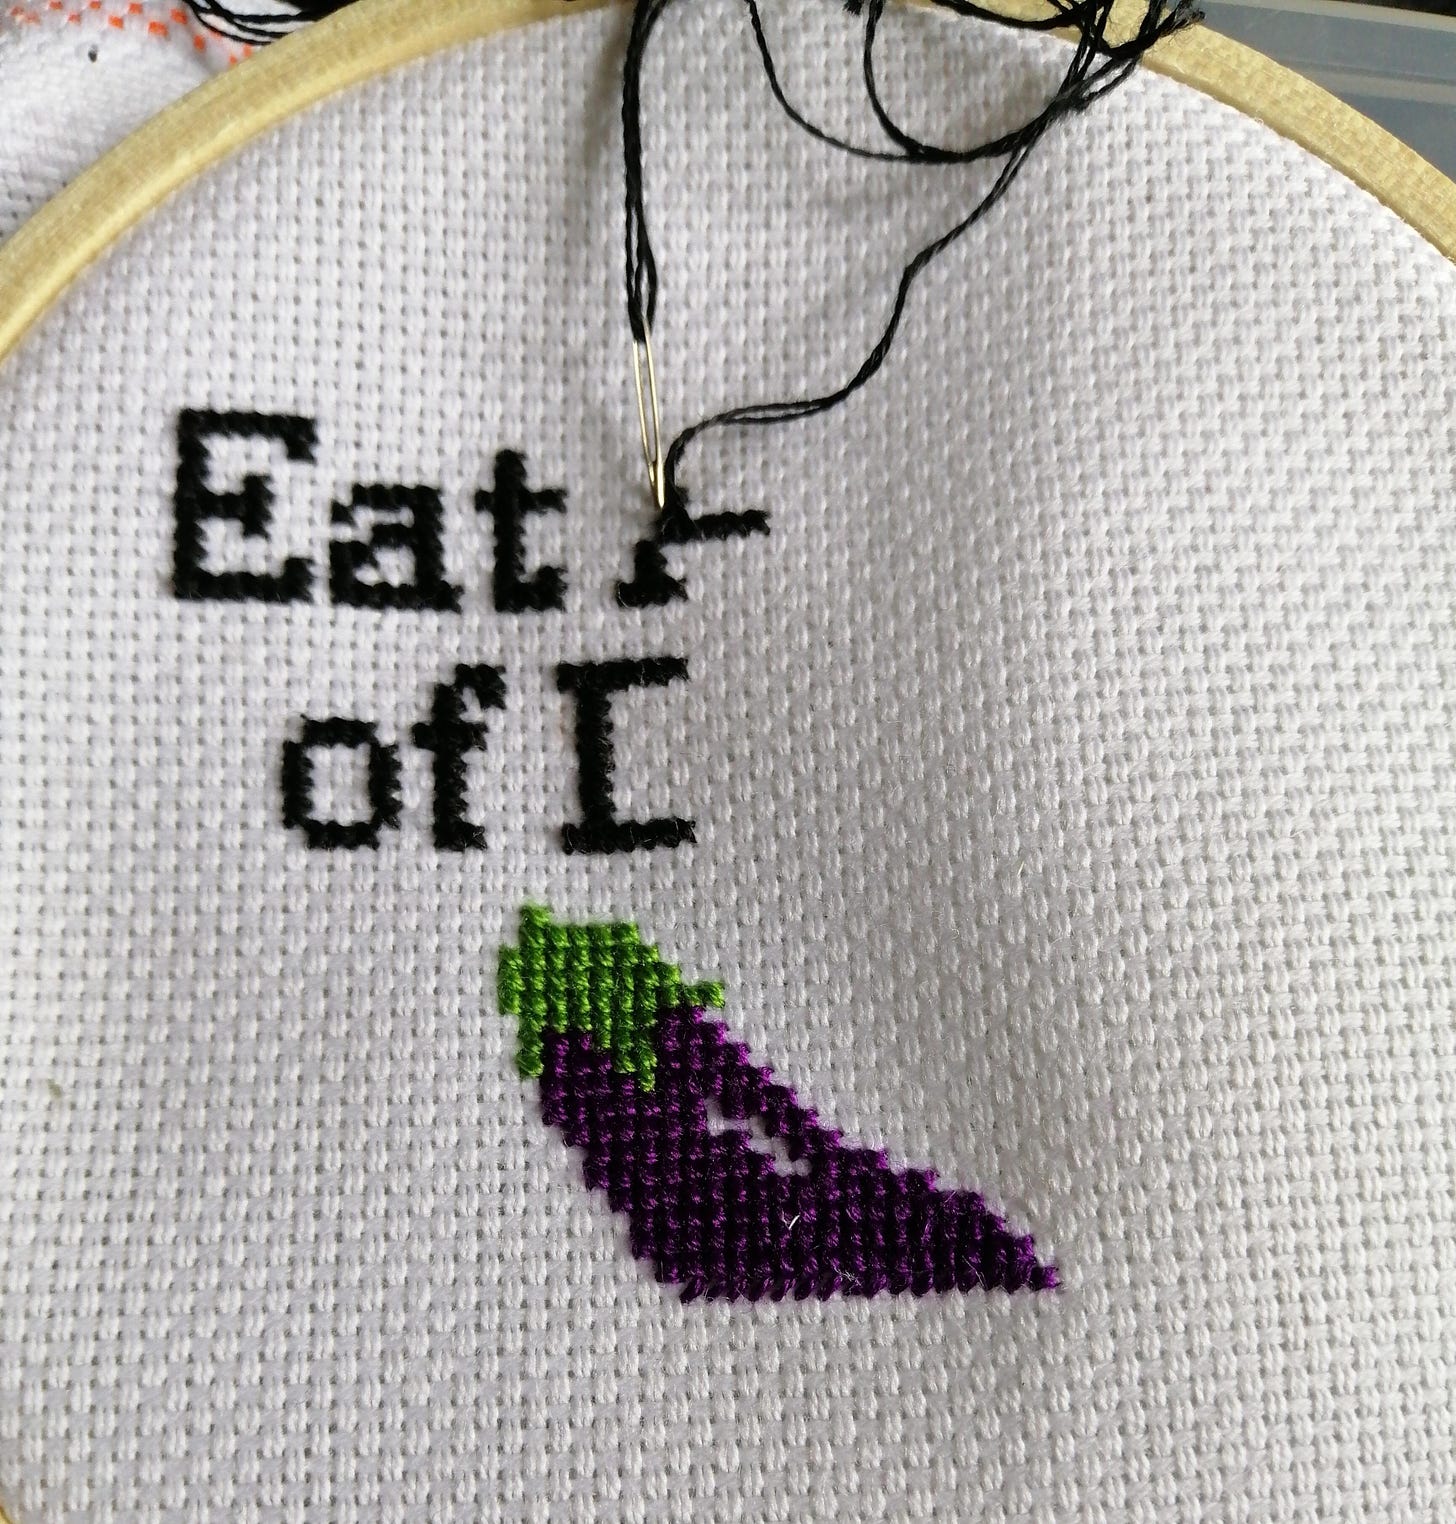 Cross stitch that is a work in progress. Text reads "eat a [blank] of D" and there is the top half of an eggplant below. 